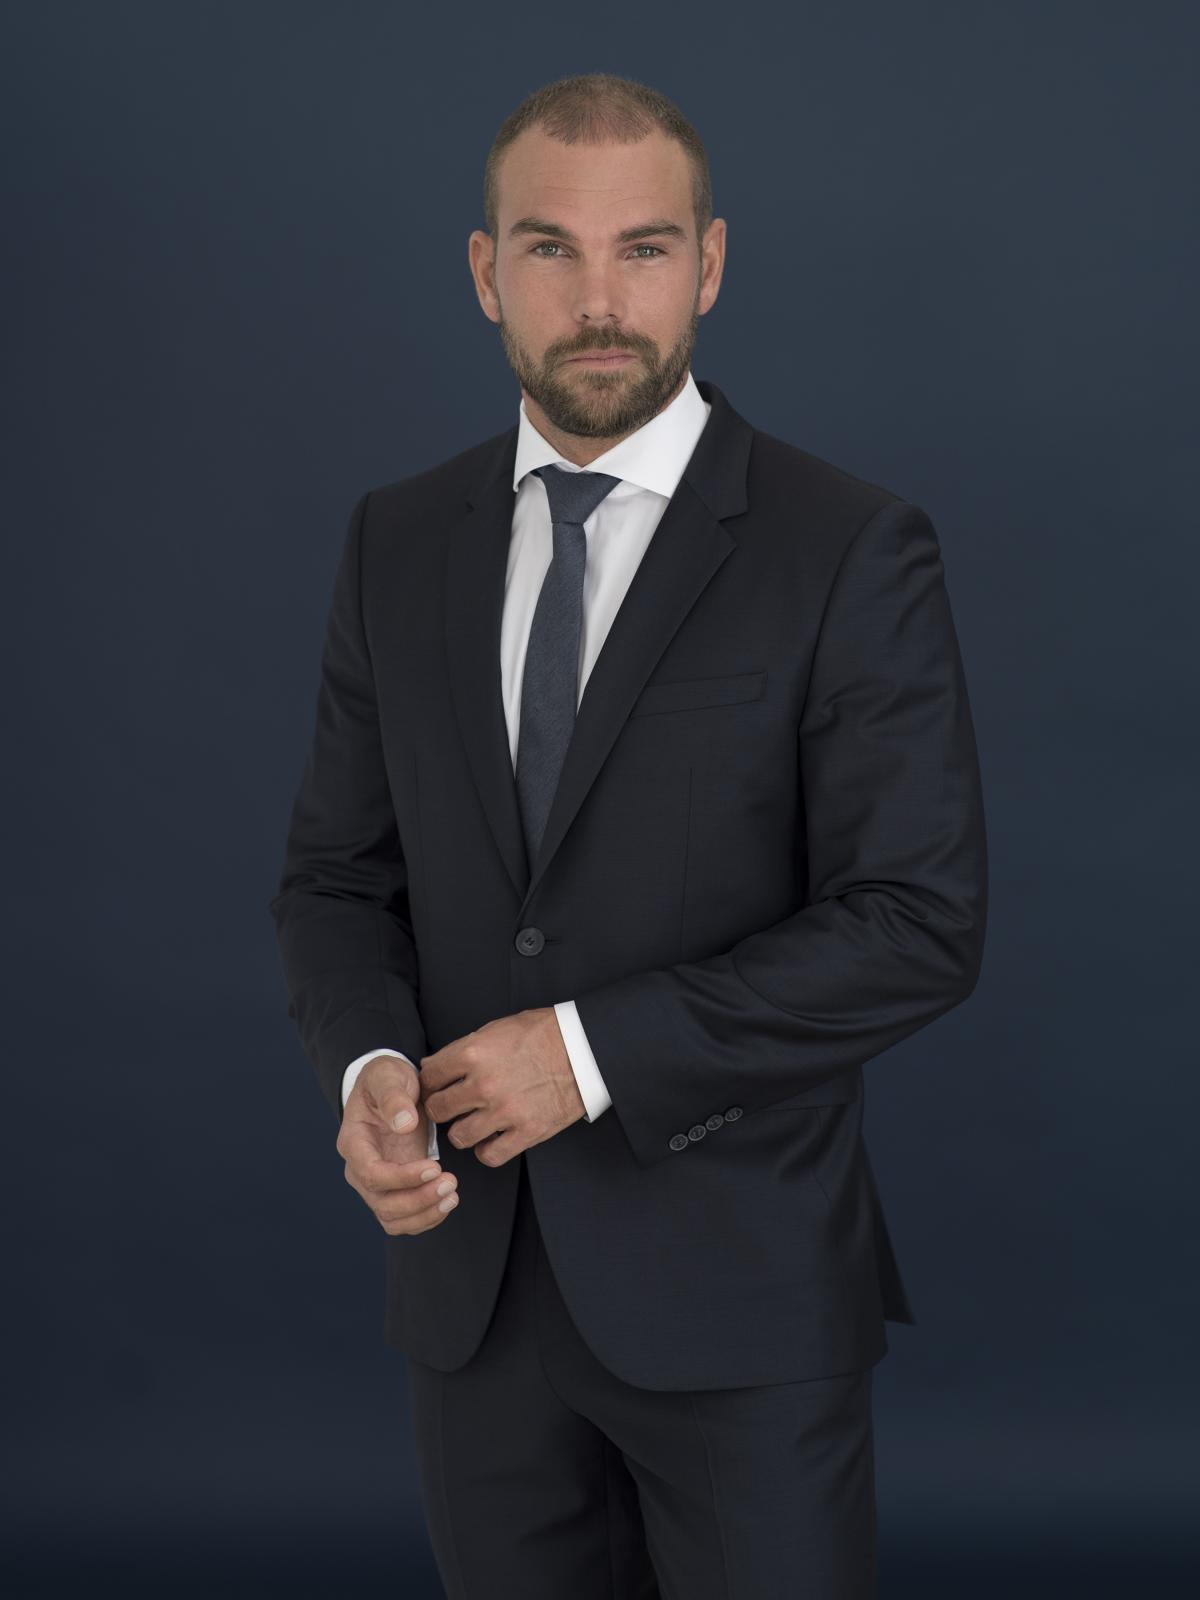 Rémy Ribbe - Attorney contract law and labour law Zurich - Partner and Attorney-at-Law